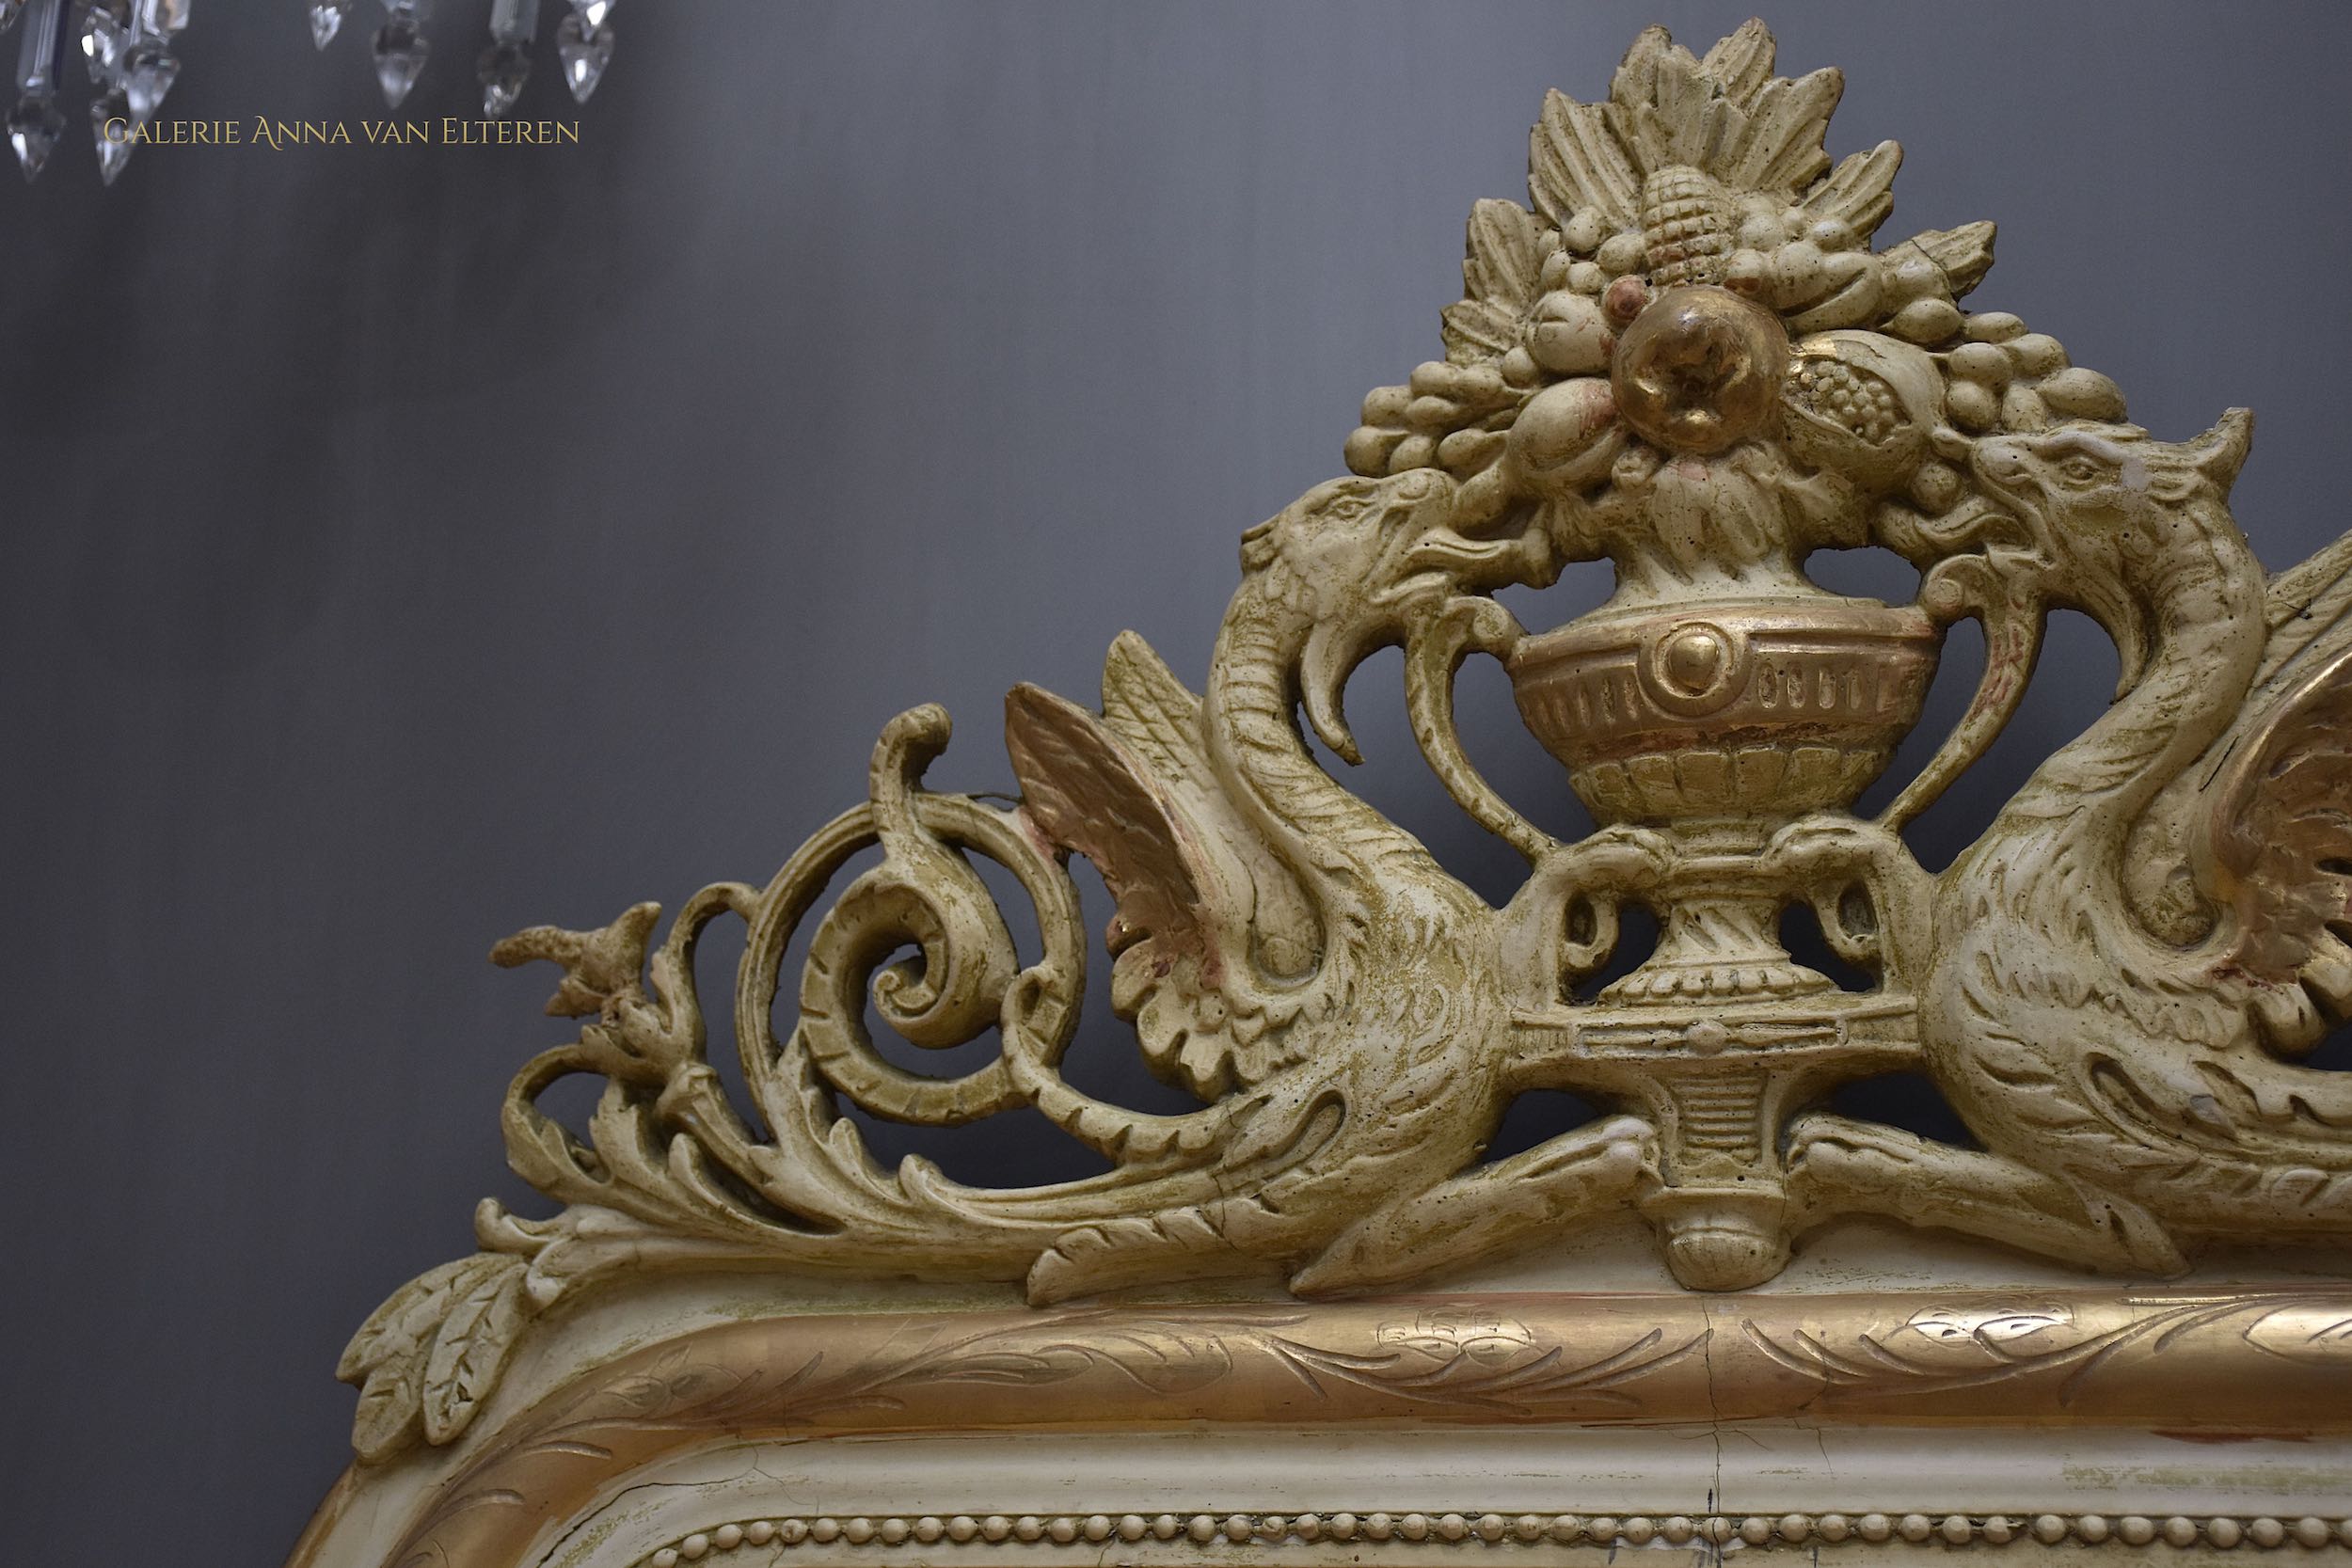 19th c. French mirror with an impressive crest